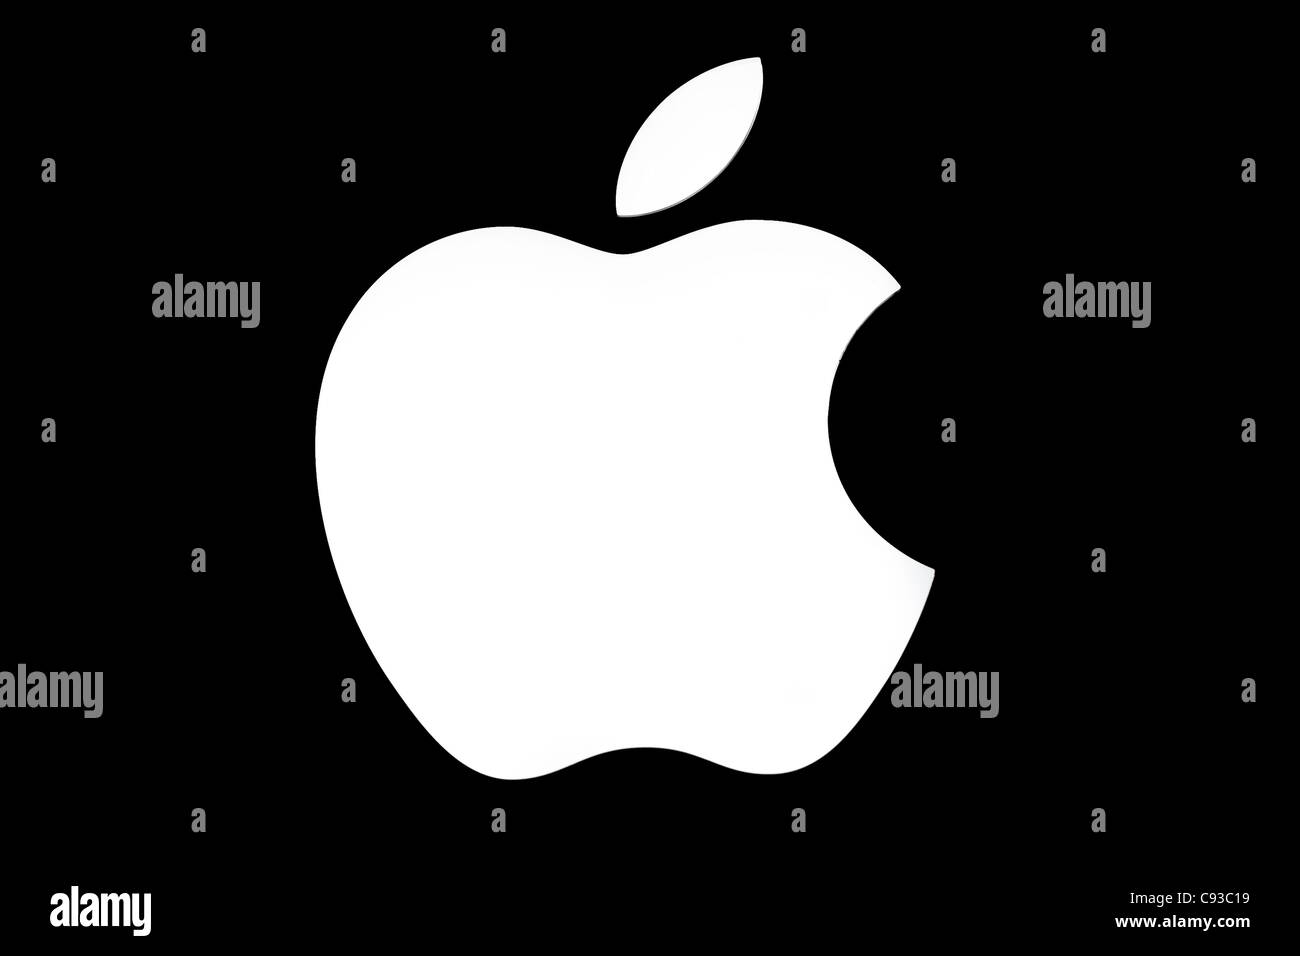 Apple Reseller Stock Photos Apple Reseller Stock Images Alamy